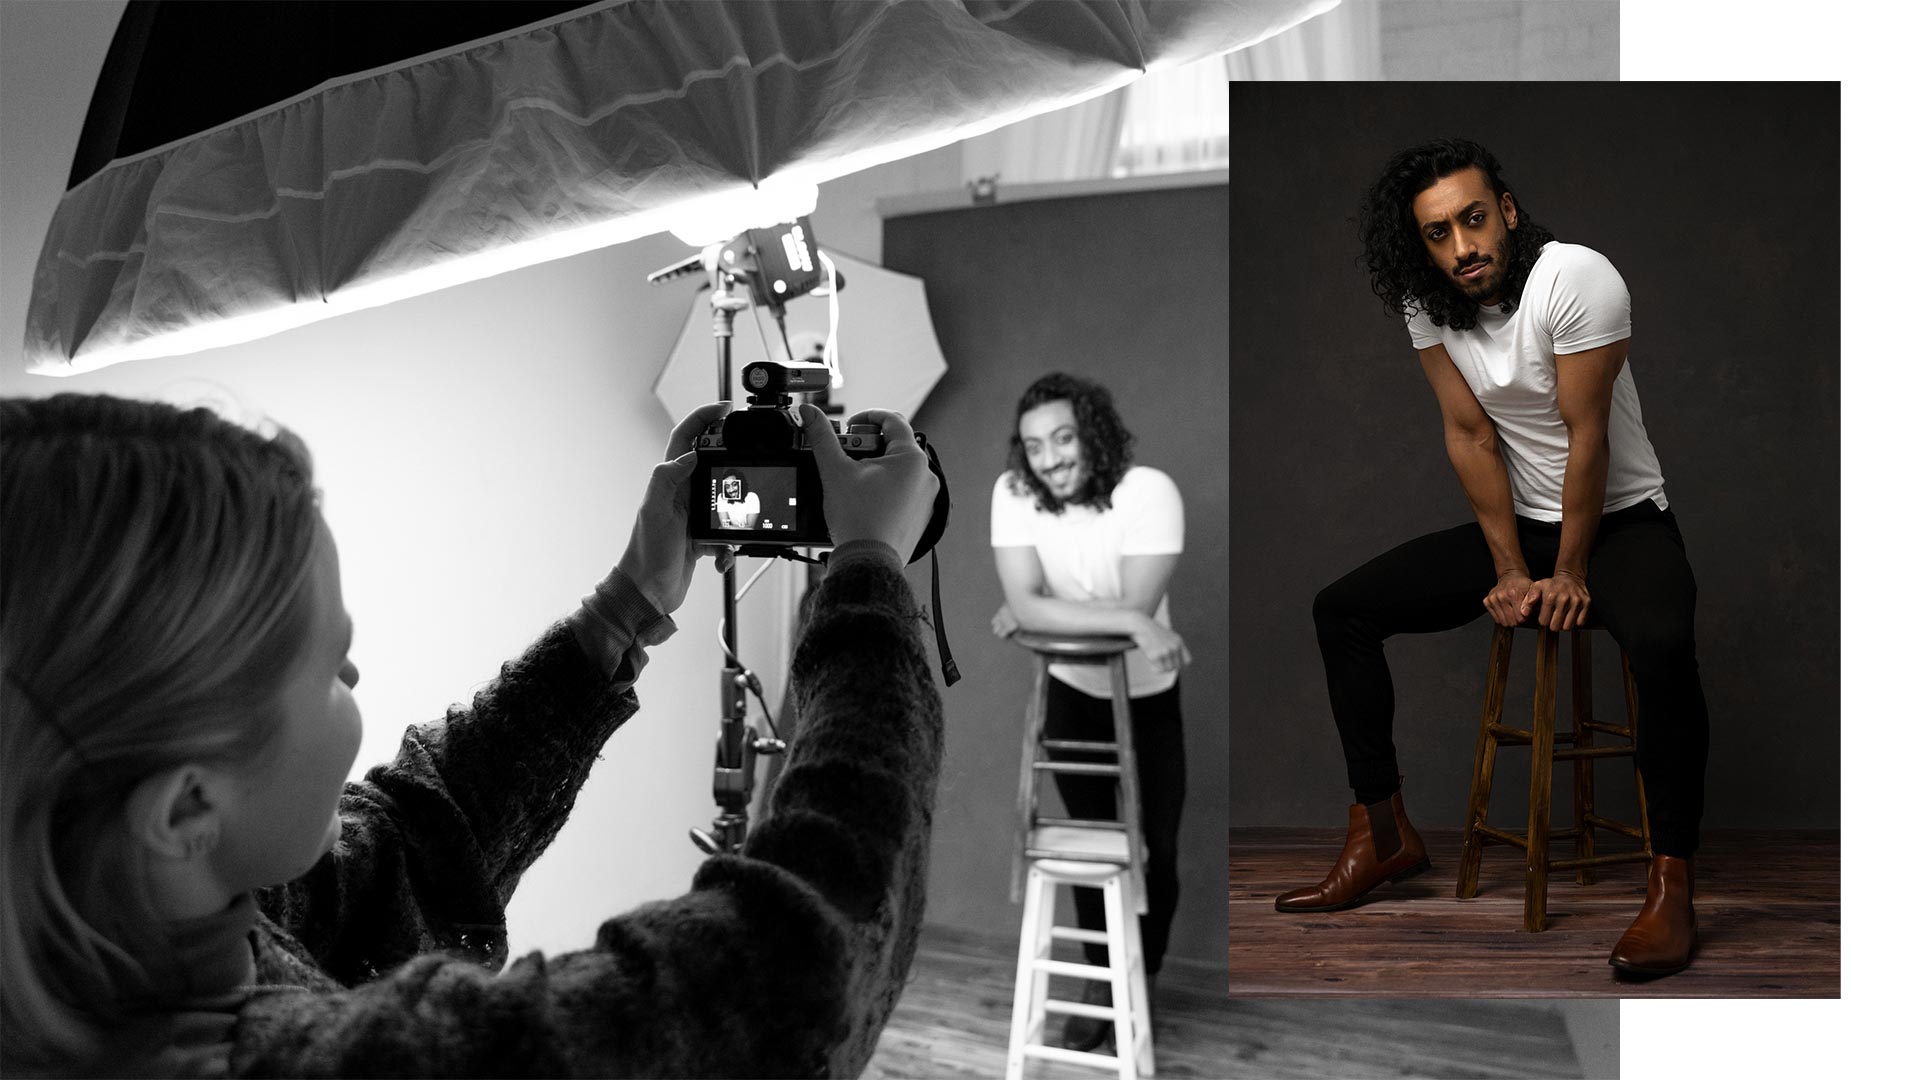 studio portrait photoshoot - behind the scenes and final image